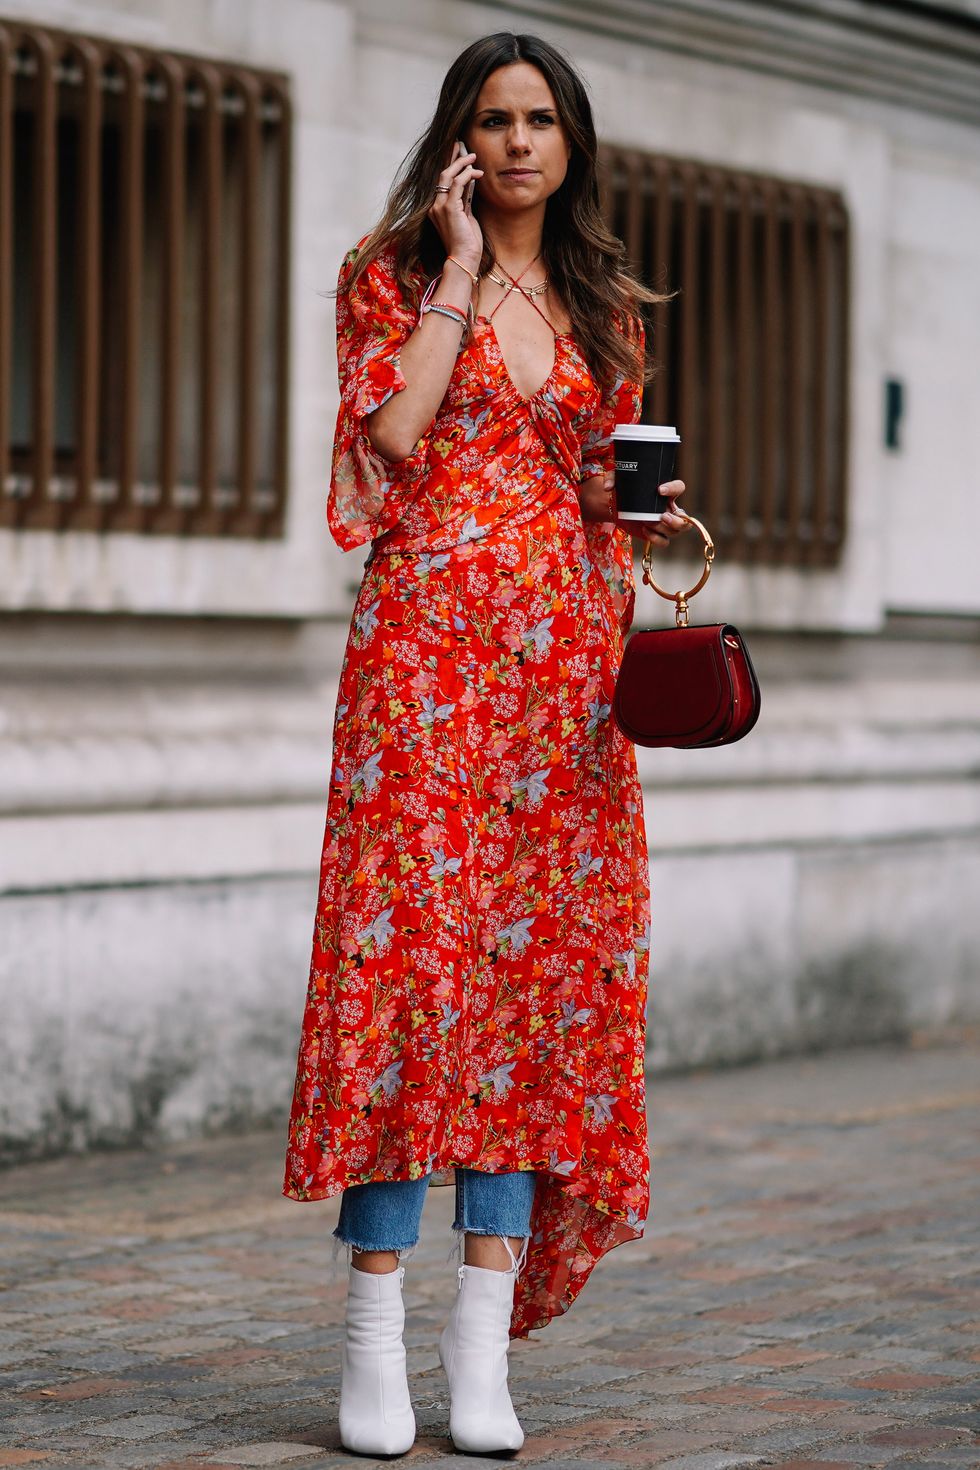 How to wear dresses over jeans – Styling advice for wearing dresses ...